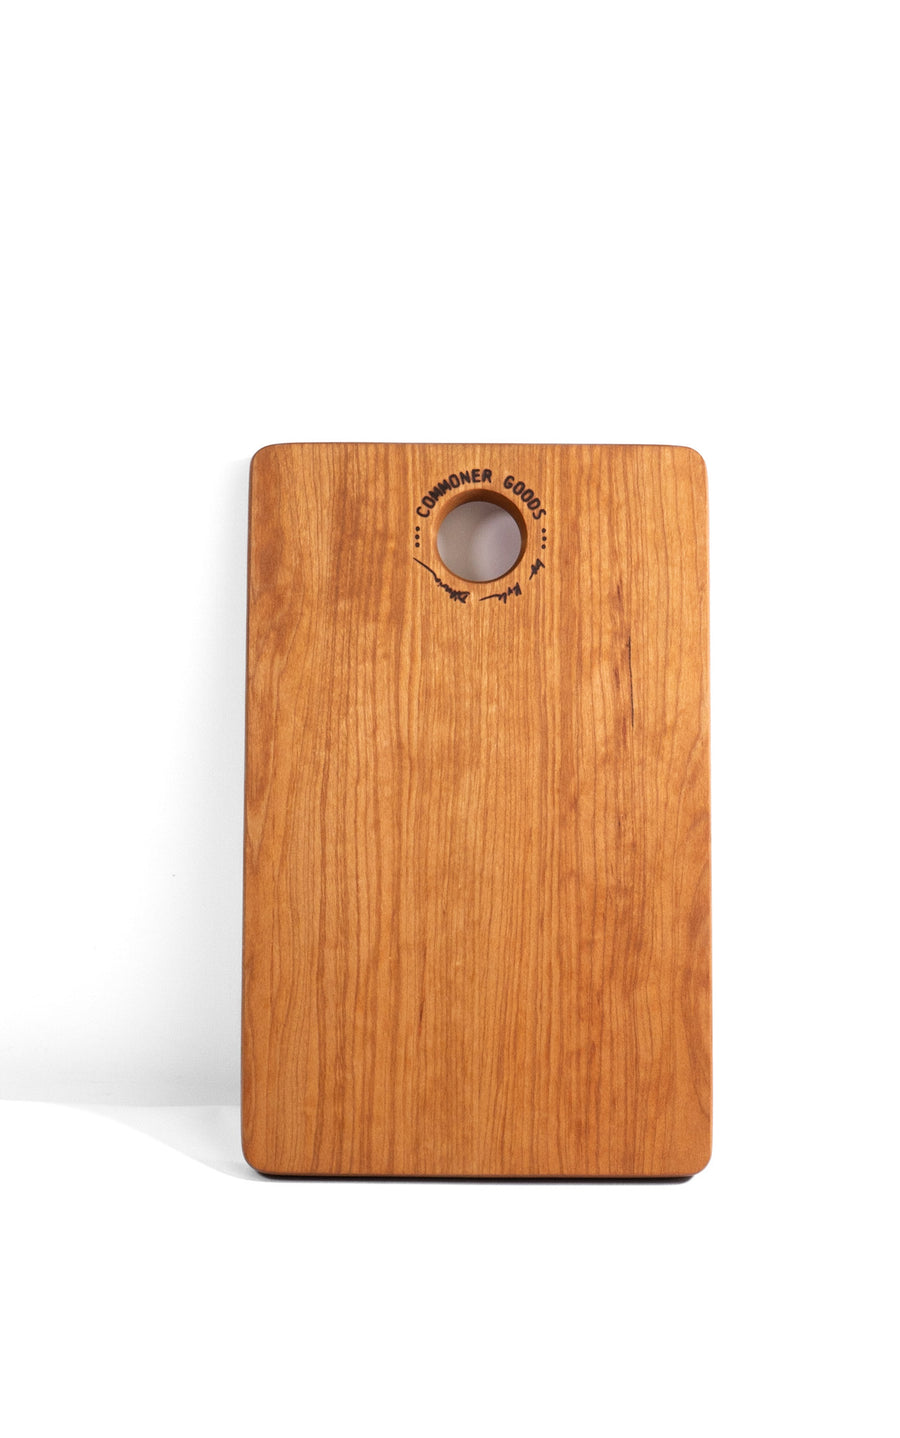 Small Cherry Cutting Board by Commoner Goods